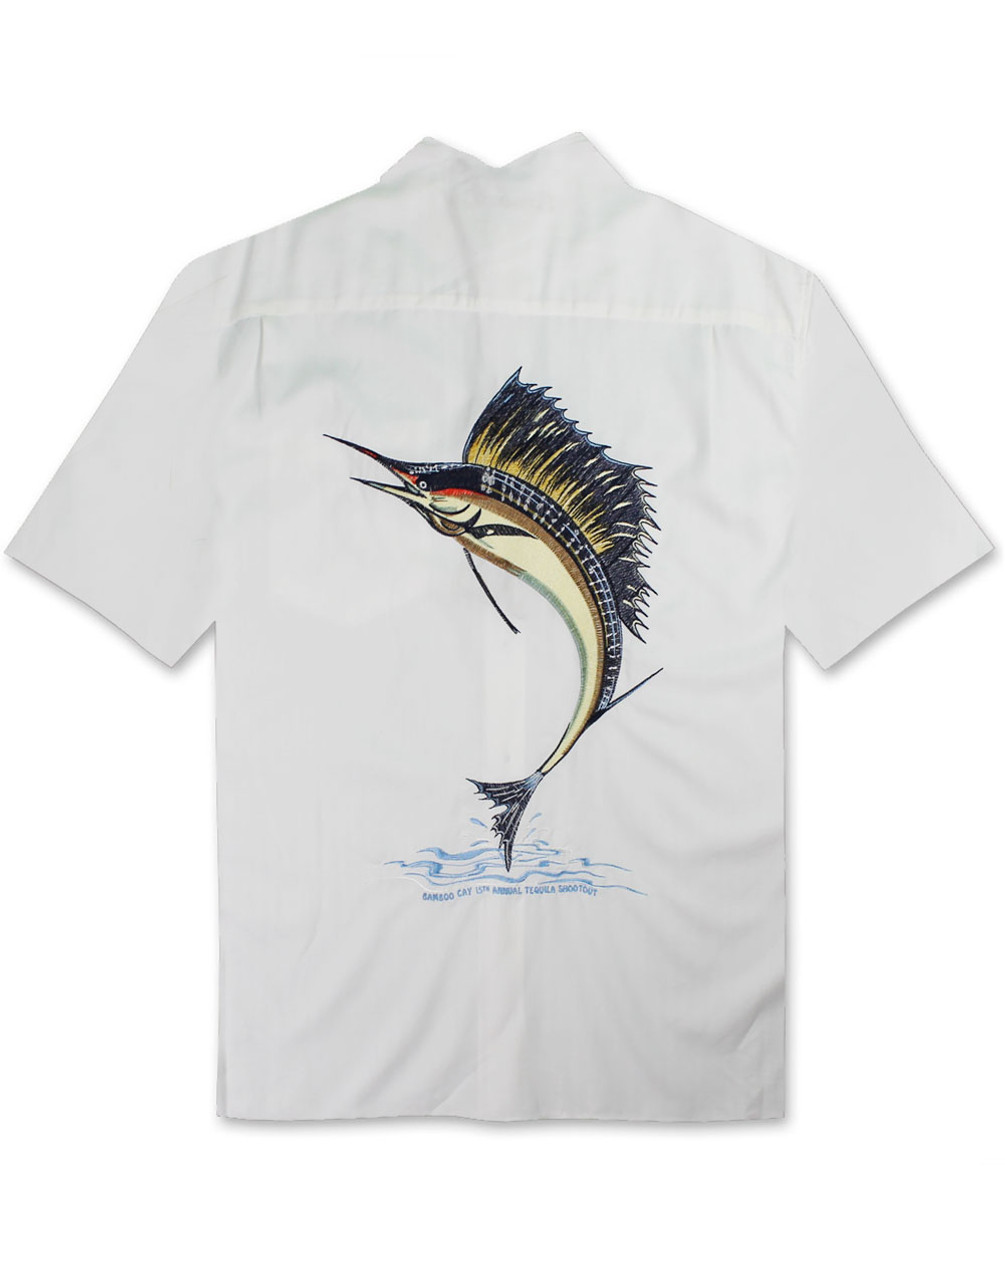 Sailfish Shootout Embroidered Polynosic Camp Shirt by Bamboo Cay - WB0331 -  Off White